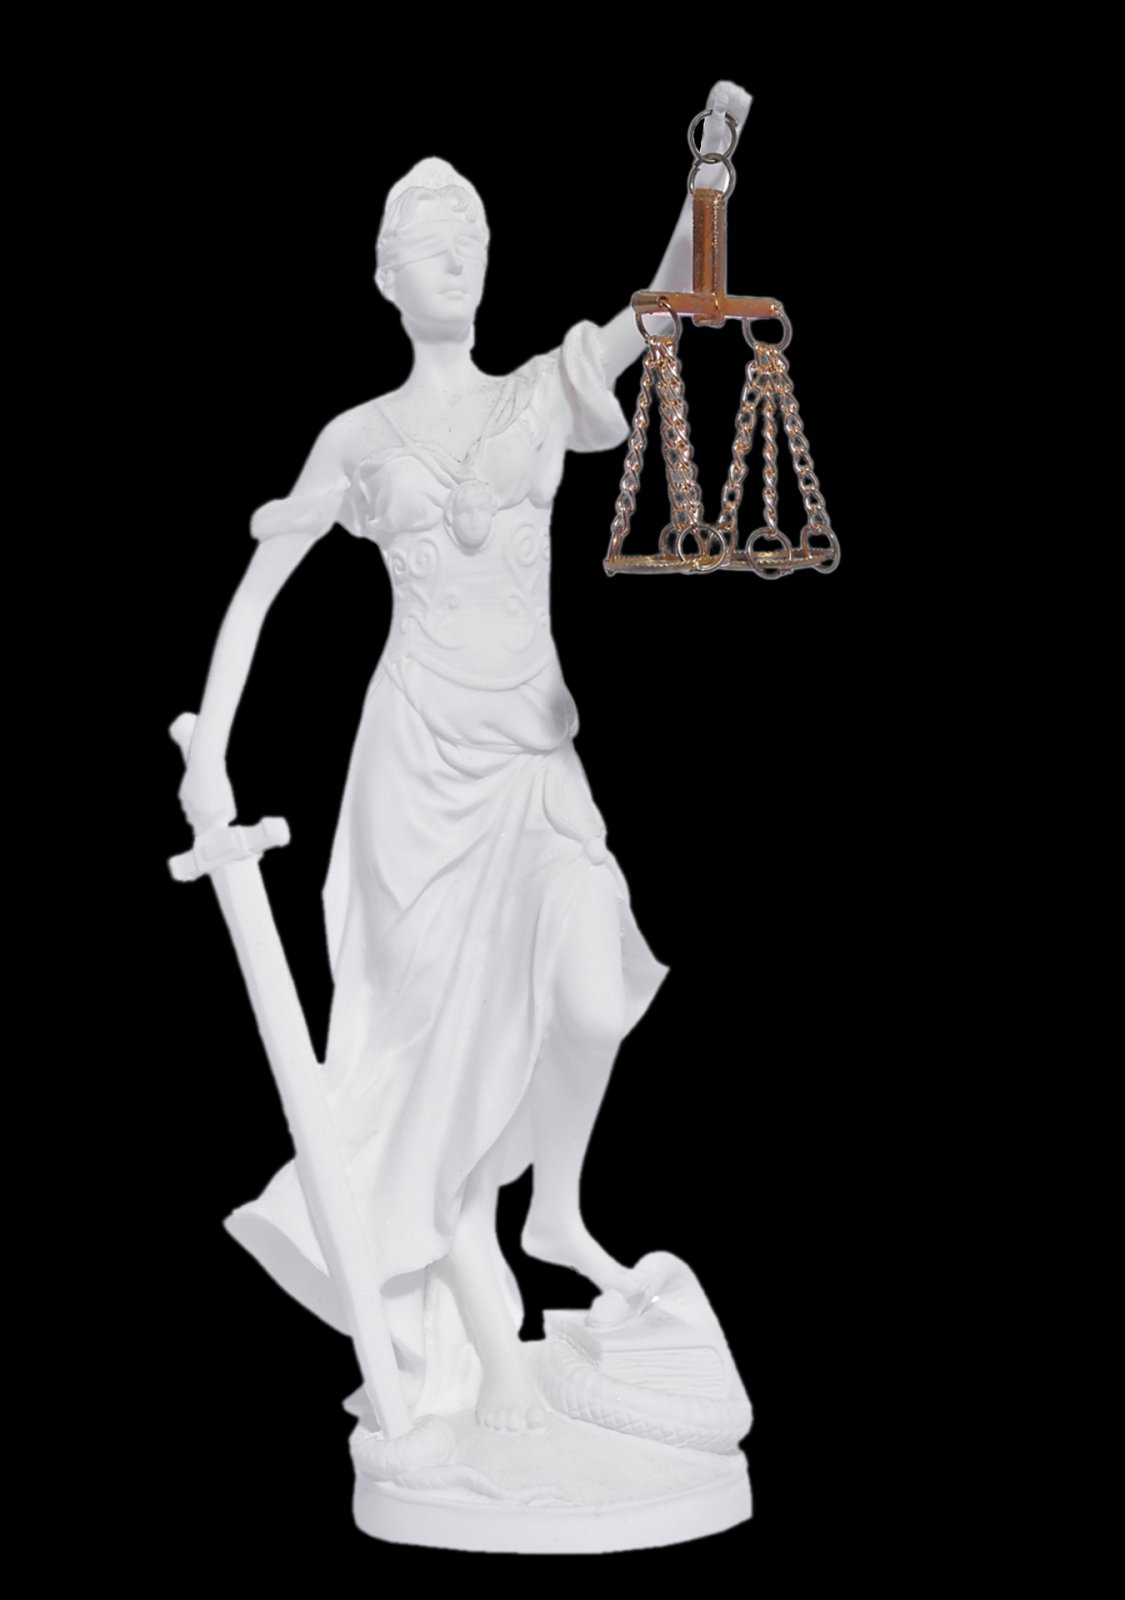 Themis the greek goddess of justice, holding the Scales of Justice and a sword